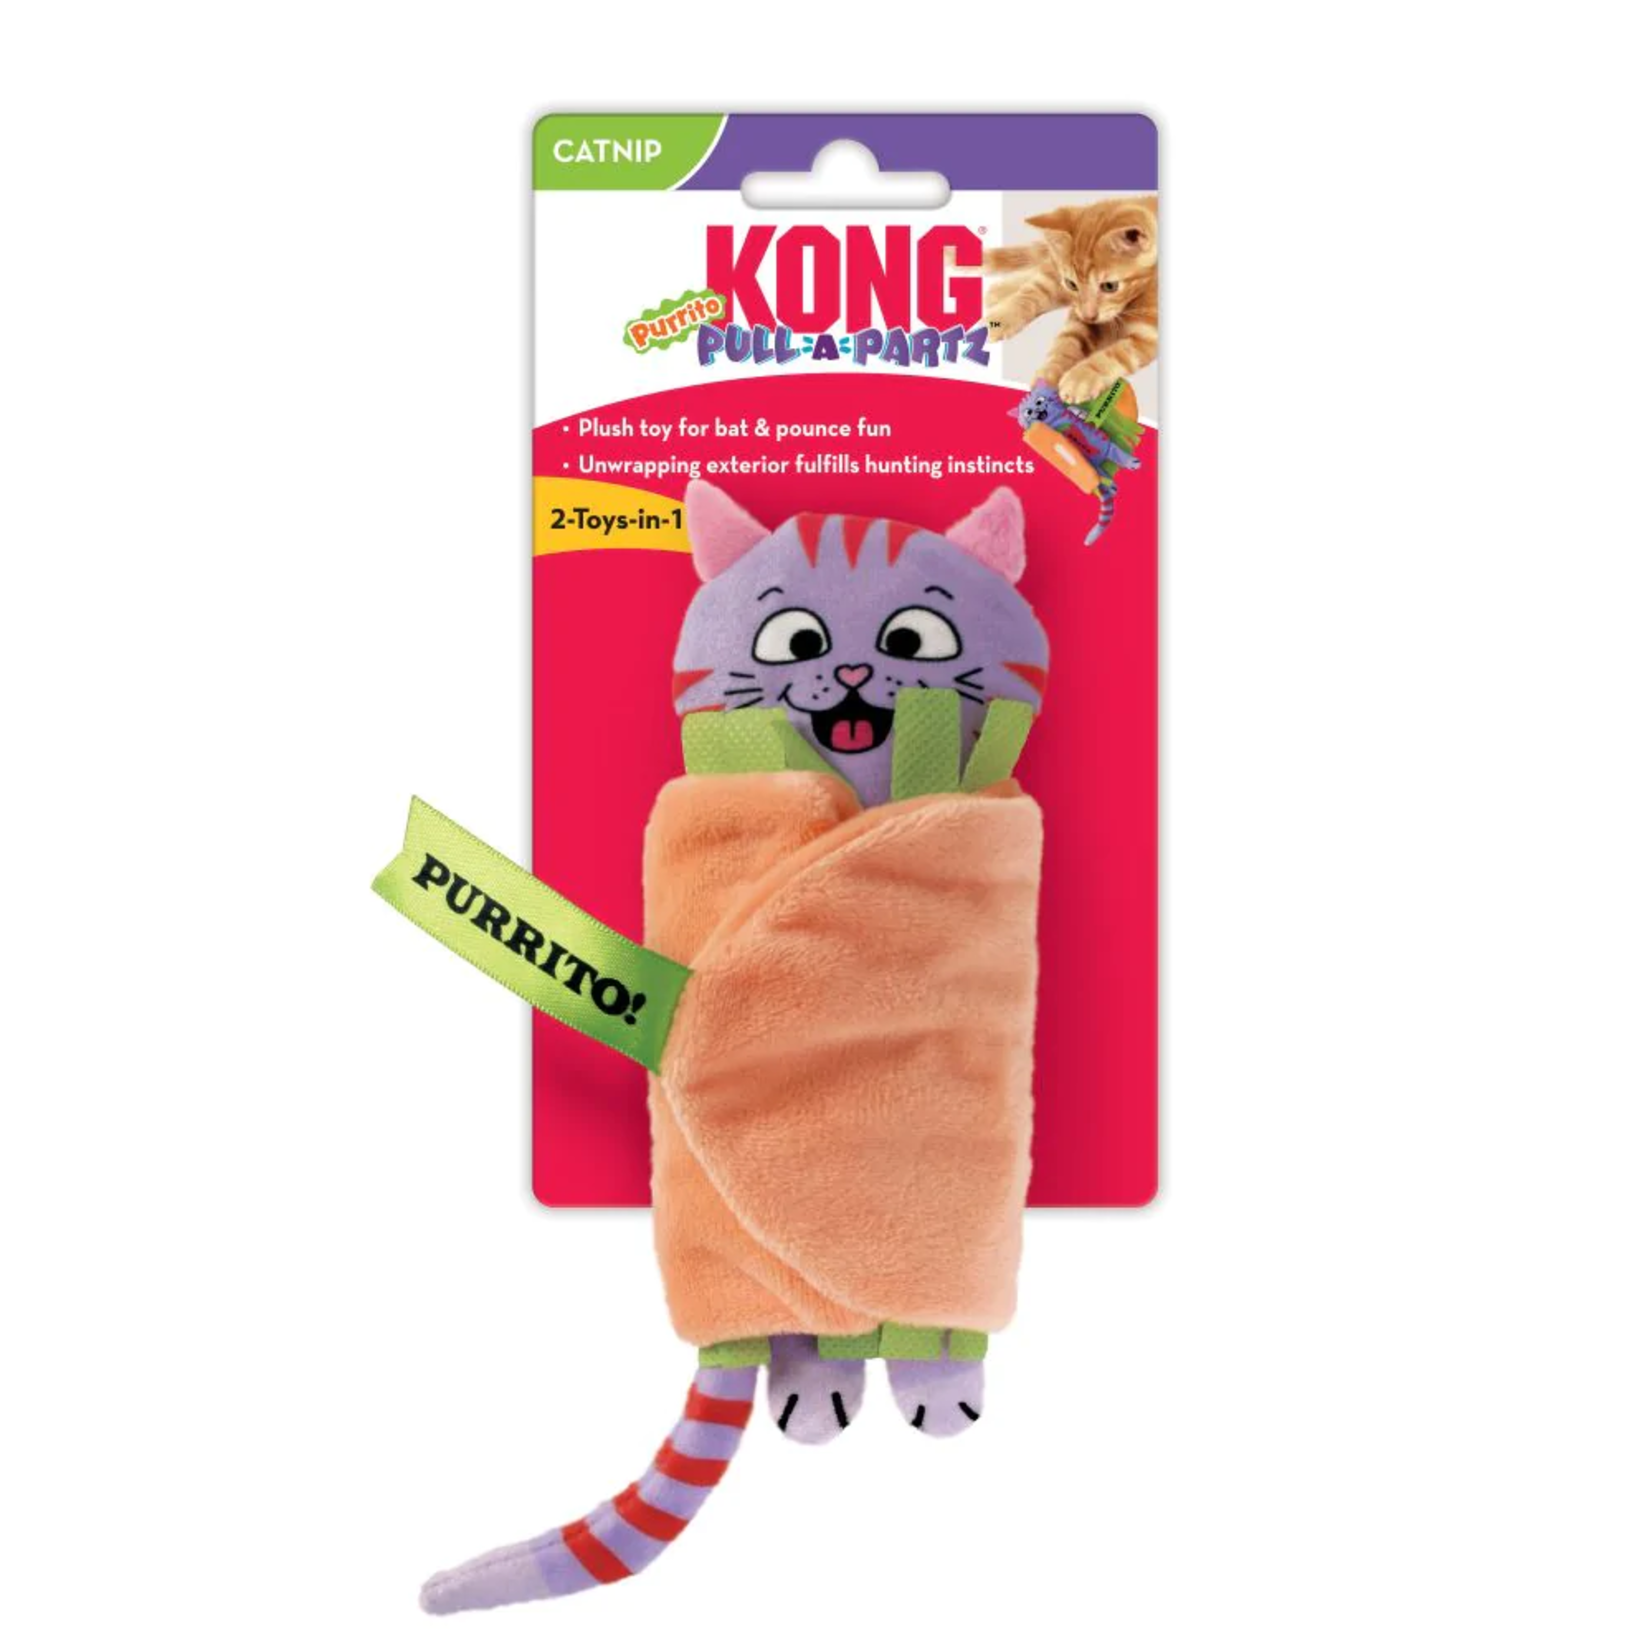 Kong KONG Pull-A-Partz Purrito Plush Cat Toy with Catnip